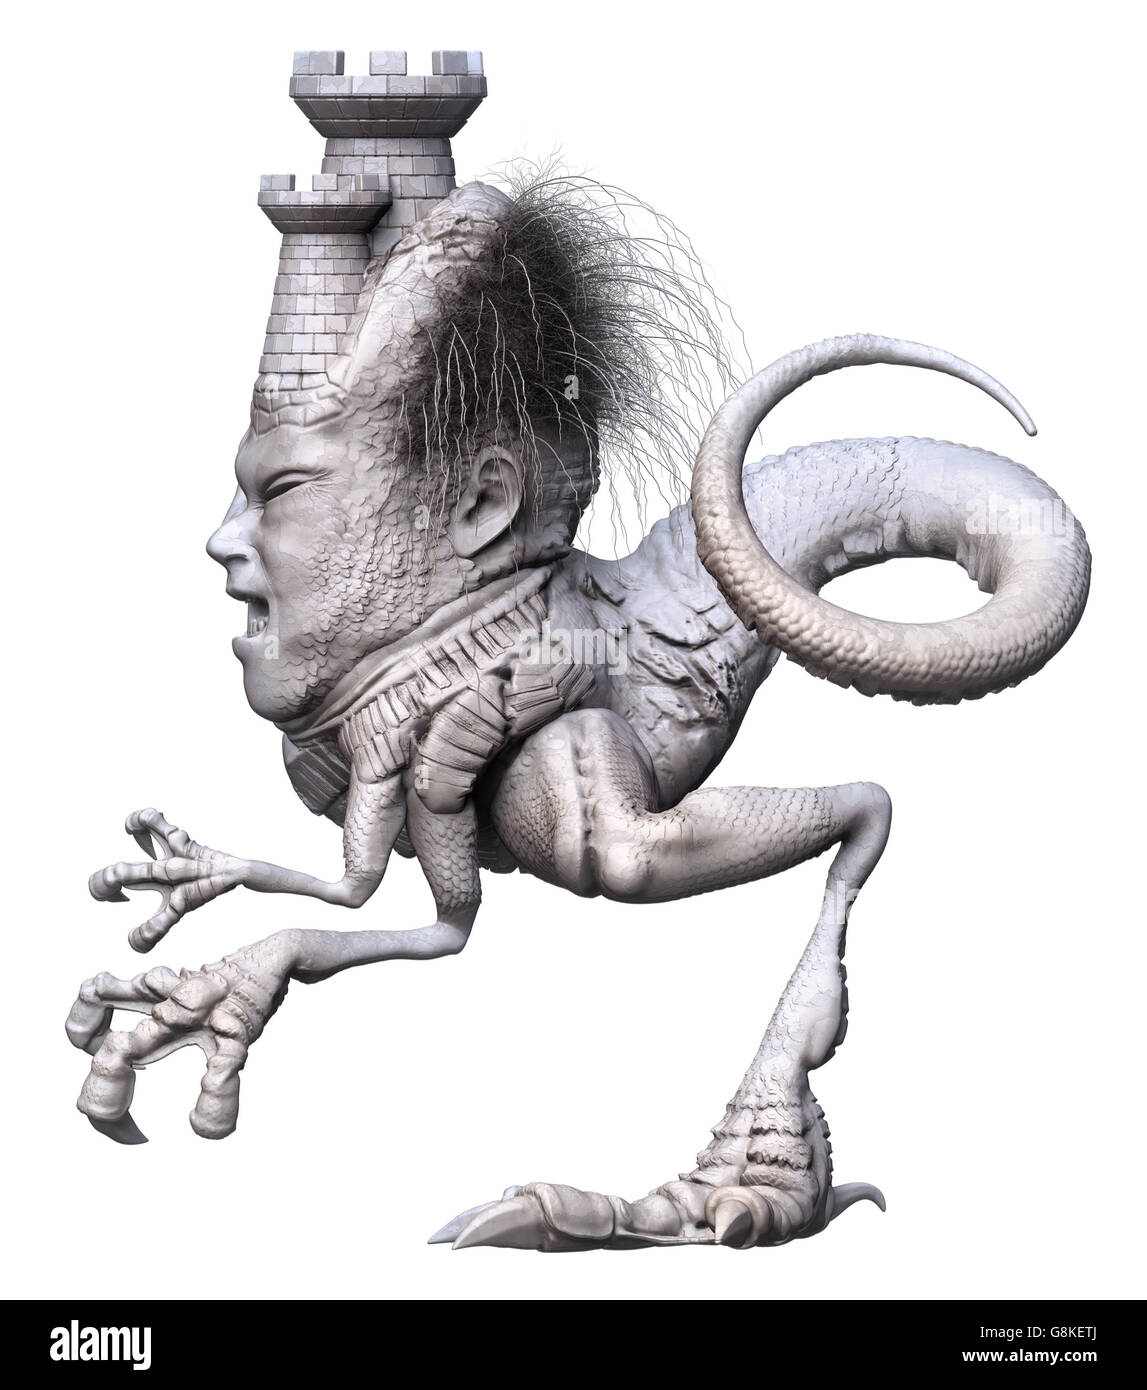 Side view of watchtower monster on white. Stock Photo